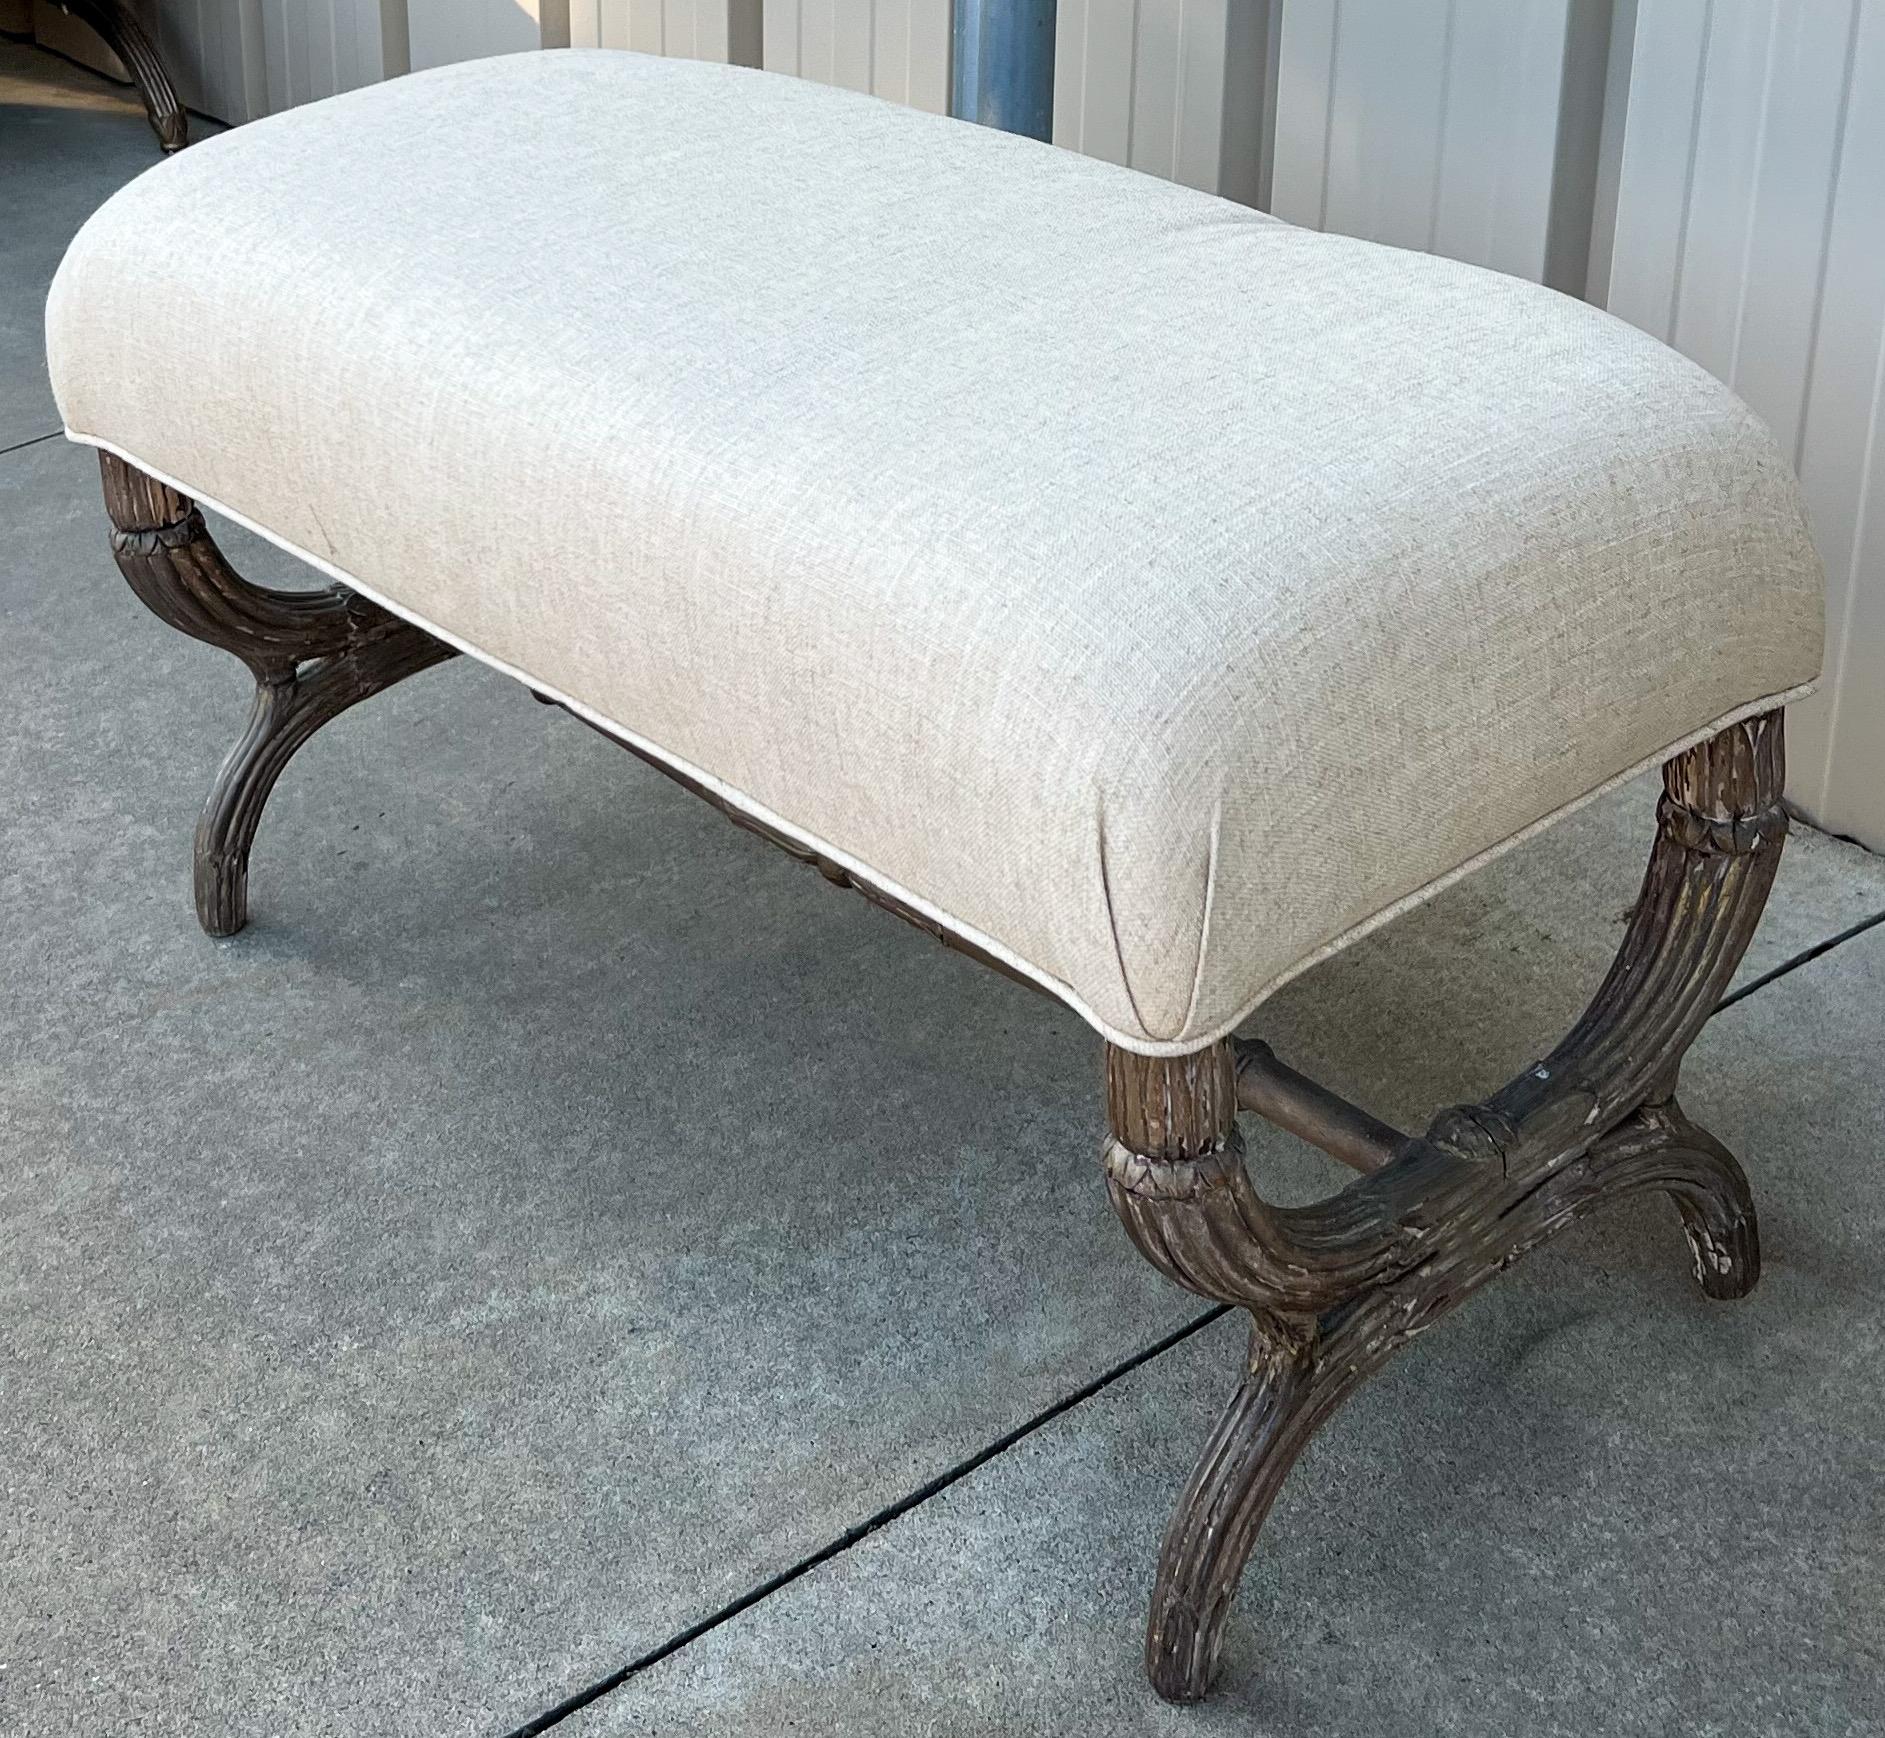 19th Century 19th-C. Italian Neo-Classical Style Carved Wood Bench in New Linen